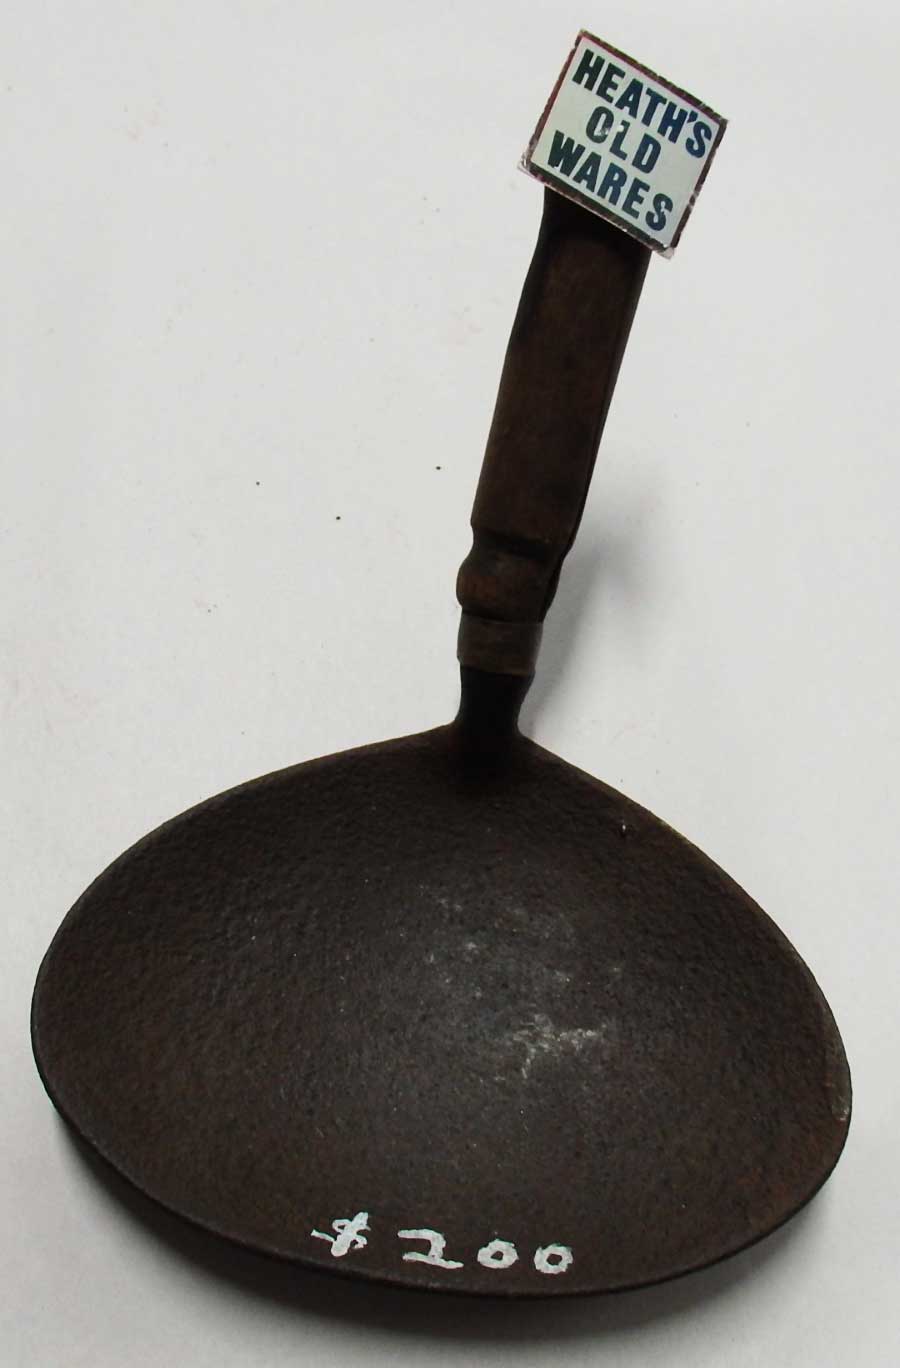 Antique industrial ladle $200 for sale at Heaths Old Wares, Collectables, Antiques & Industrial Antiques, 19-21 Broadway, Burringbar NSW 2483 Ph 0266771181 open 7 days